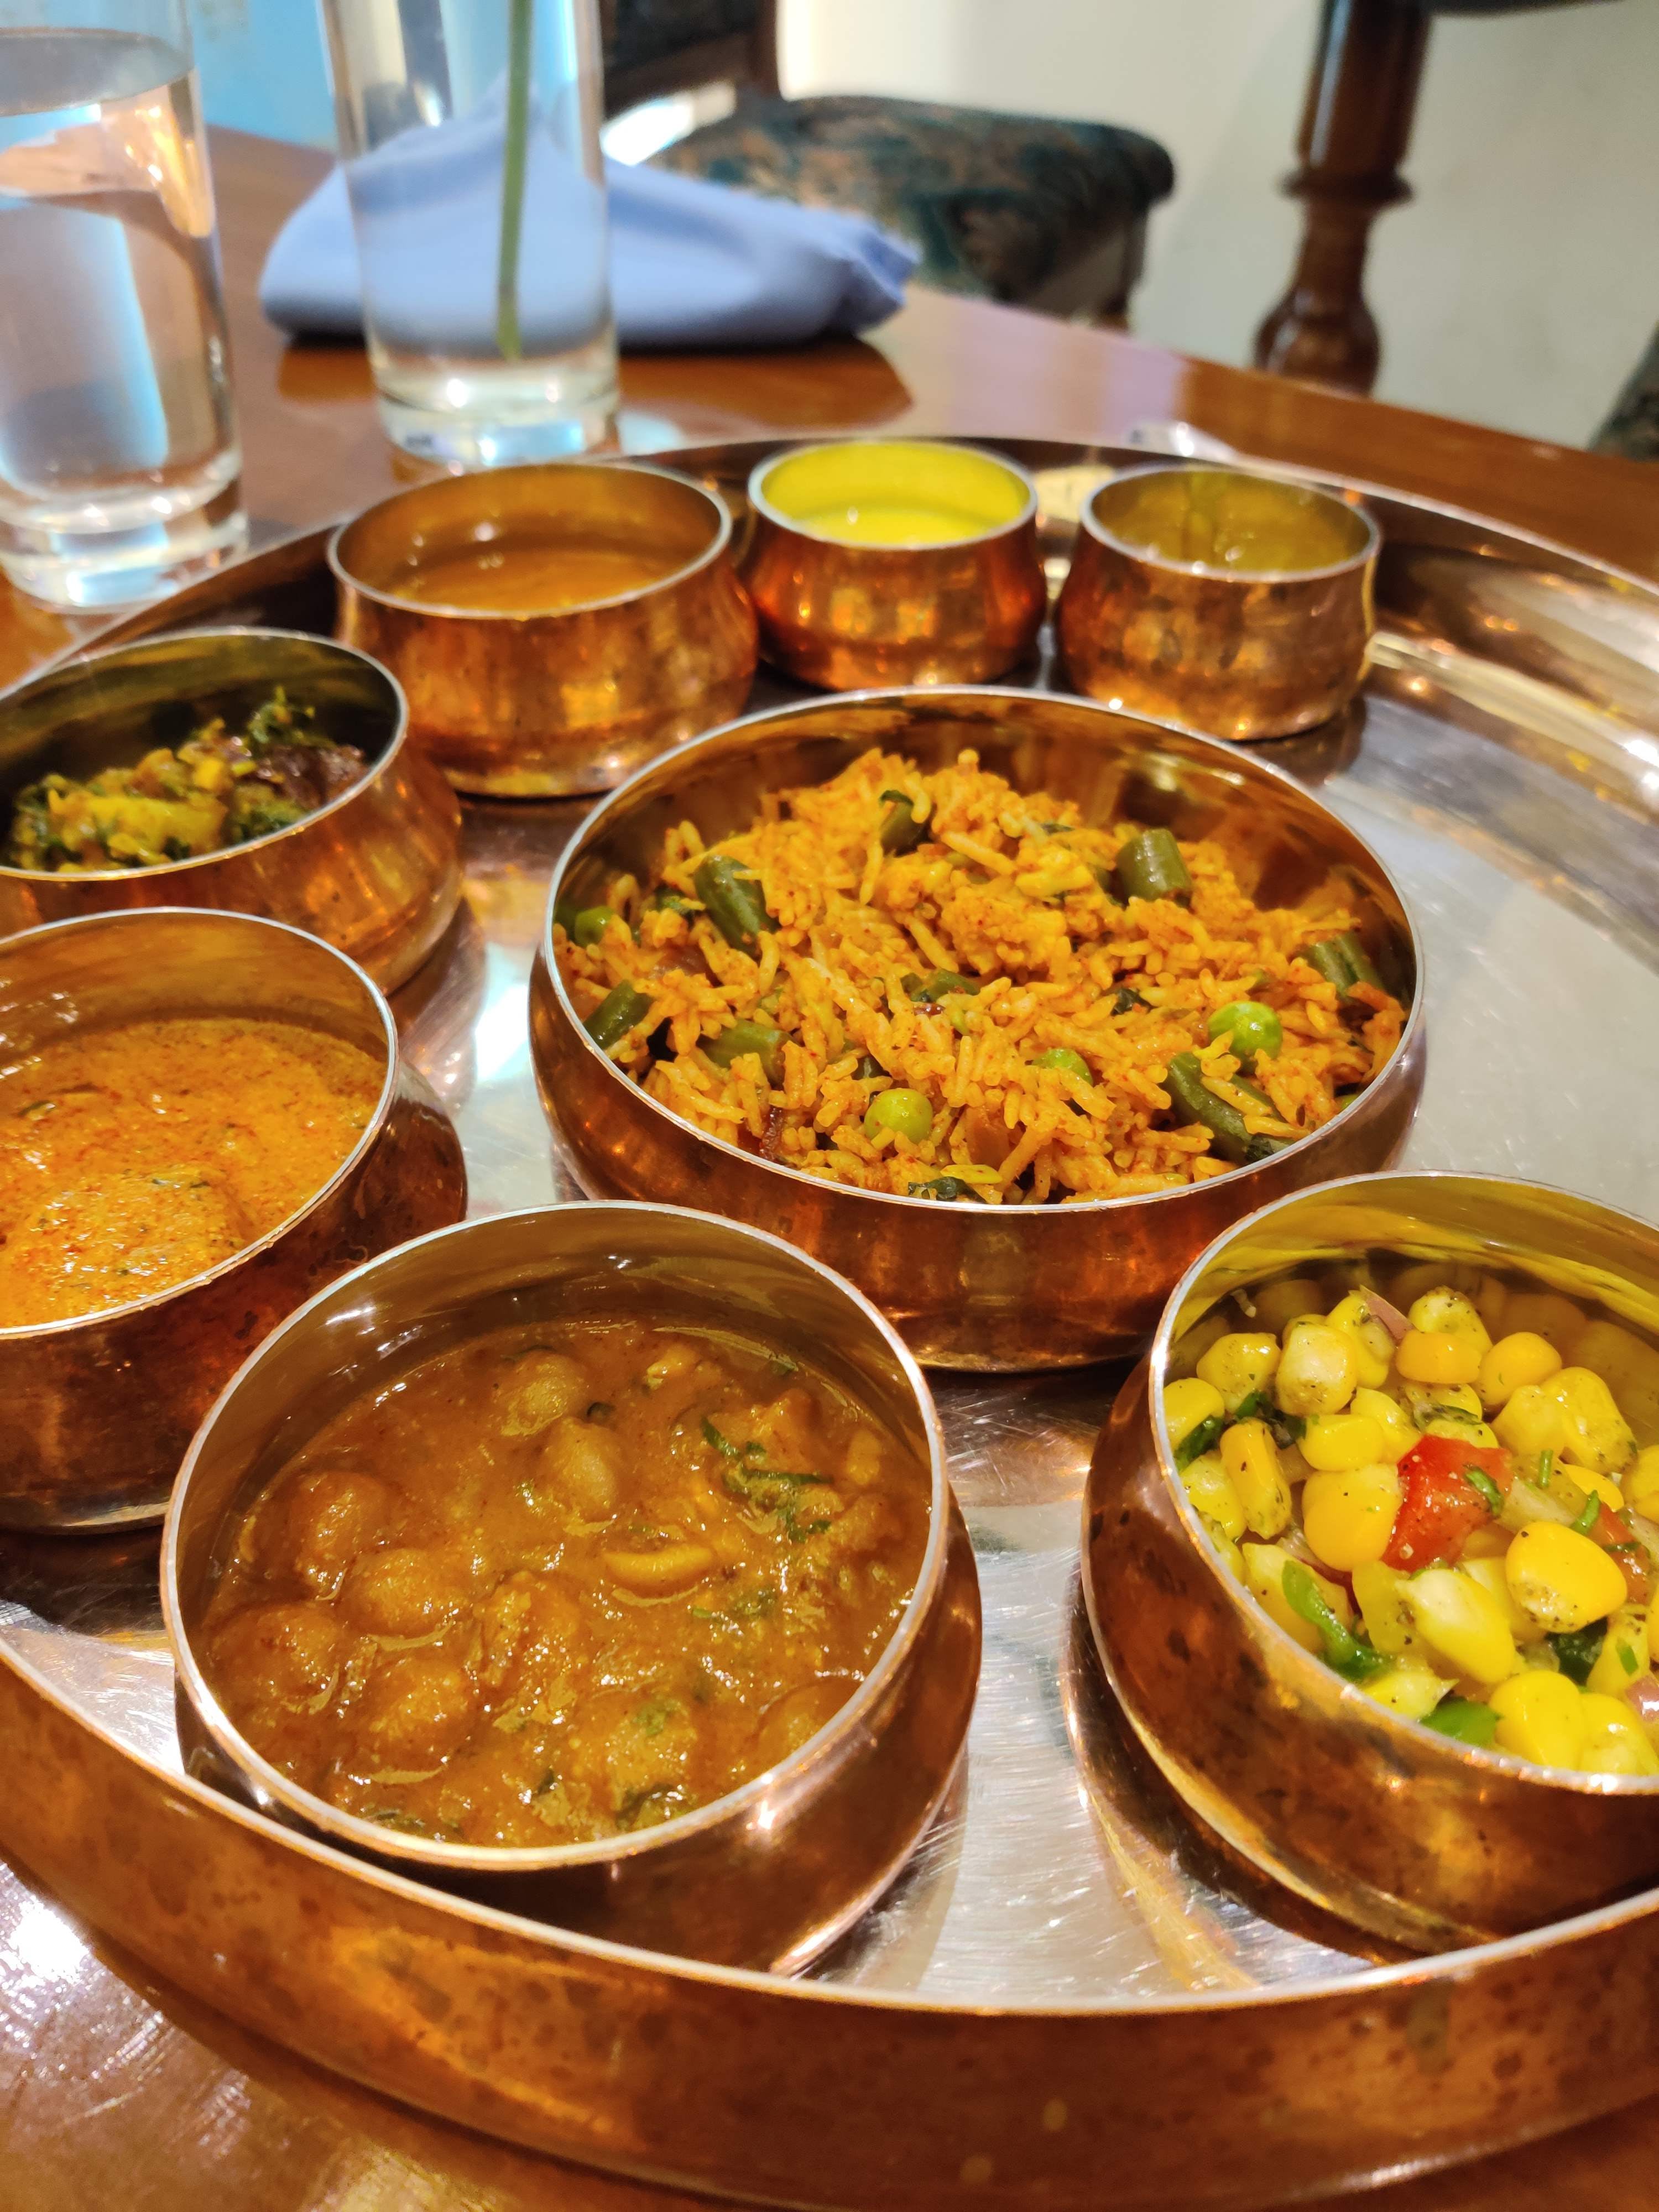 Dish,Food,Cuisine,Meal,Ingredient,Curry,Indian cuisine,Brunch,Buffet,Produce